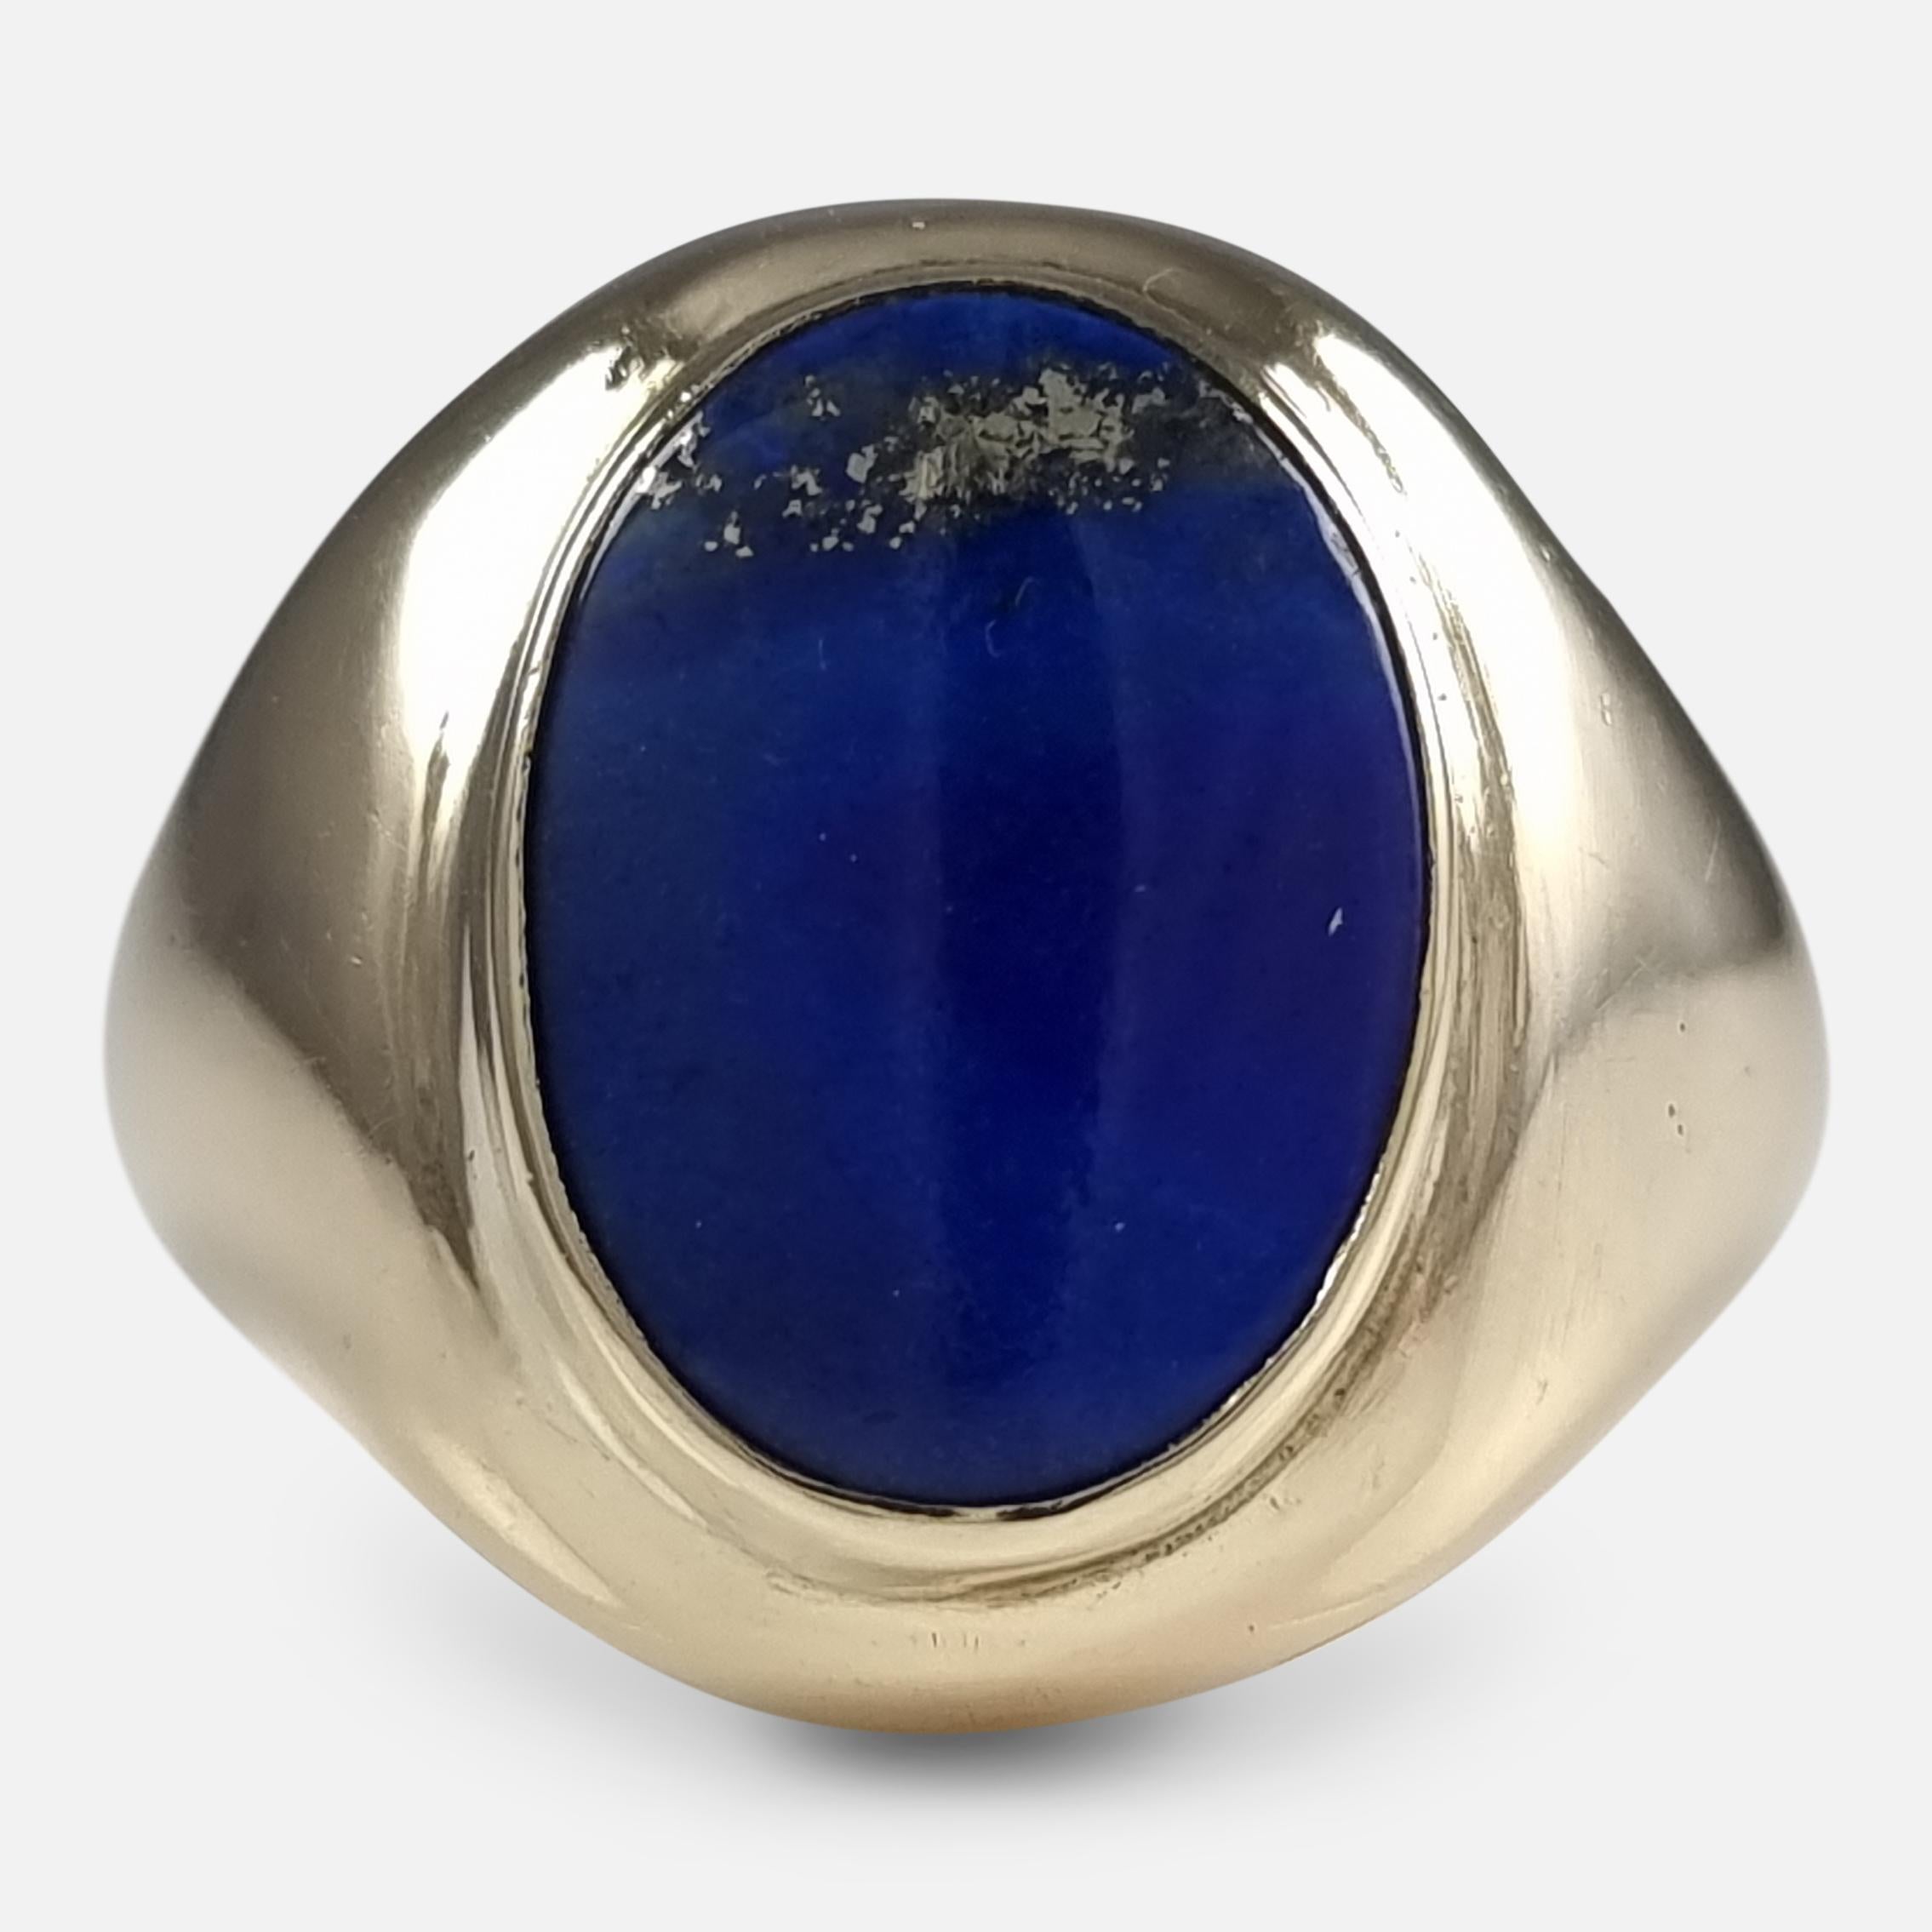 A George VI 9ct yellow gold Lapis Lazuli cocktail ring. The chunky gold ring is of hollow construction, with a oval Lapis Lazuli within a rub-over setting.

The ring is hallmarked with London marks, date letter 'F' to denote 1941, and stamped